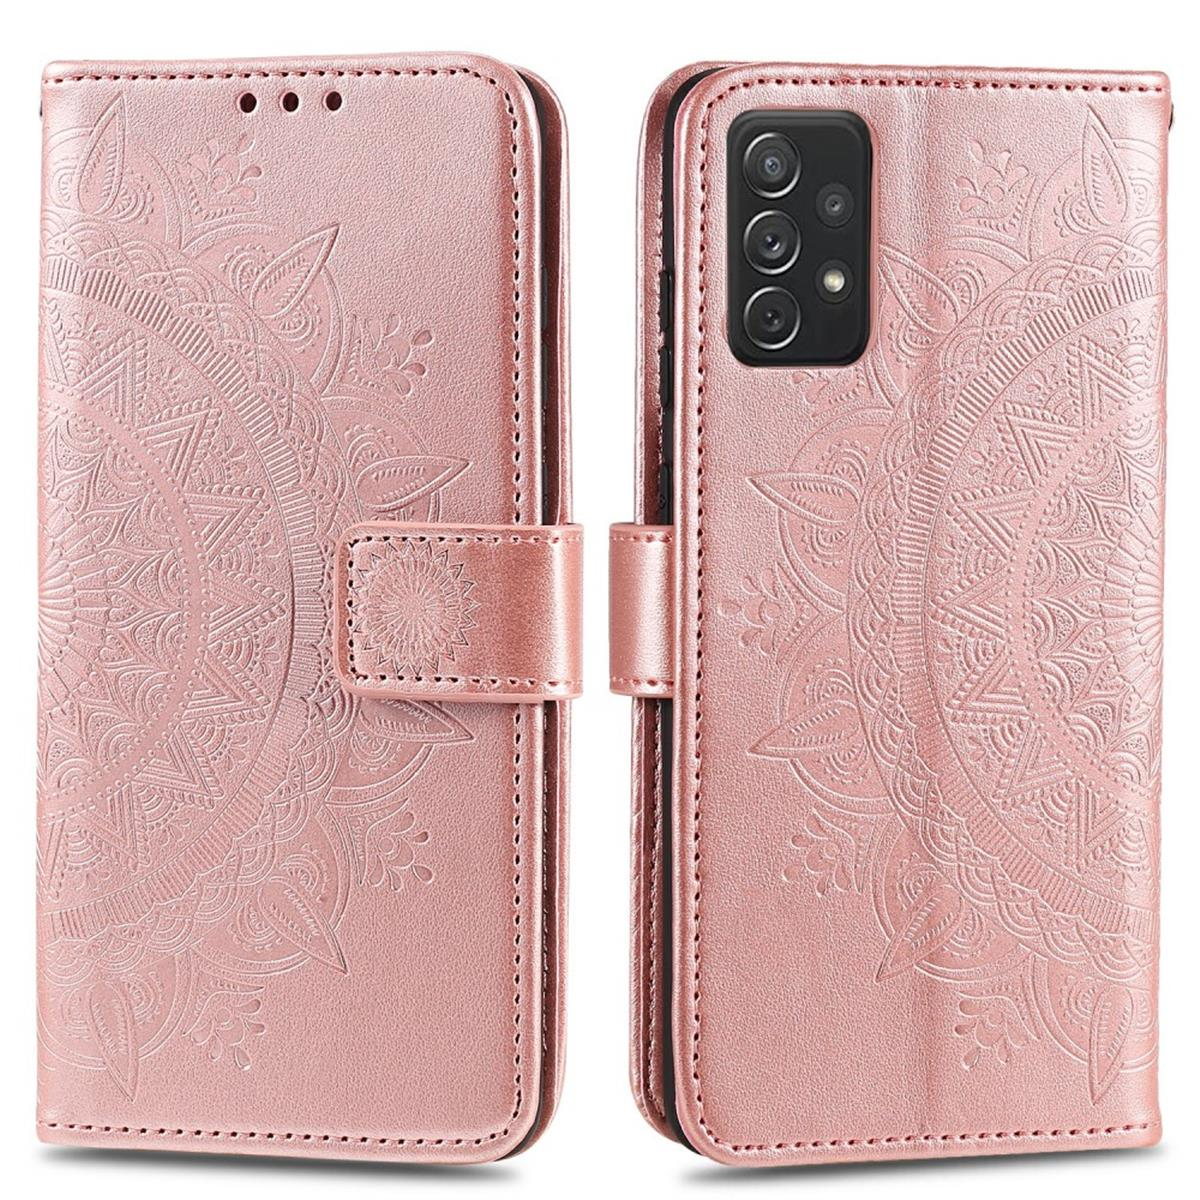 A52/A52 5G/A52s Klapphülle Bookcover, Roségold Samsung, Mandala Galaxy COVERKINGZ mit Muster, 5G,